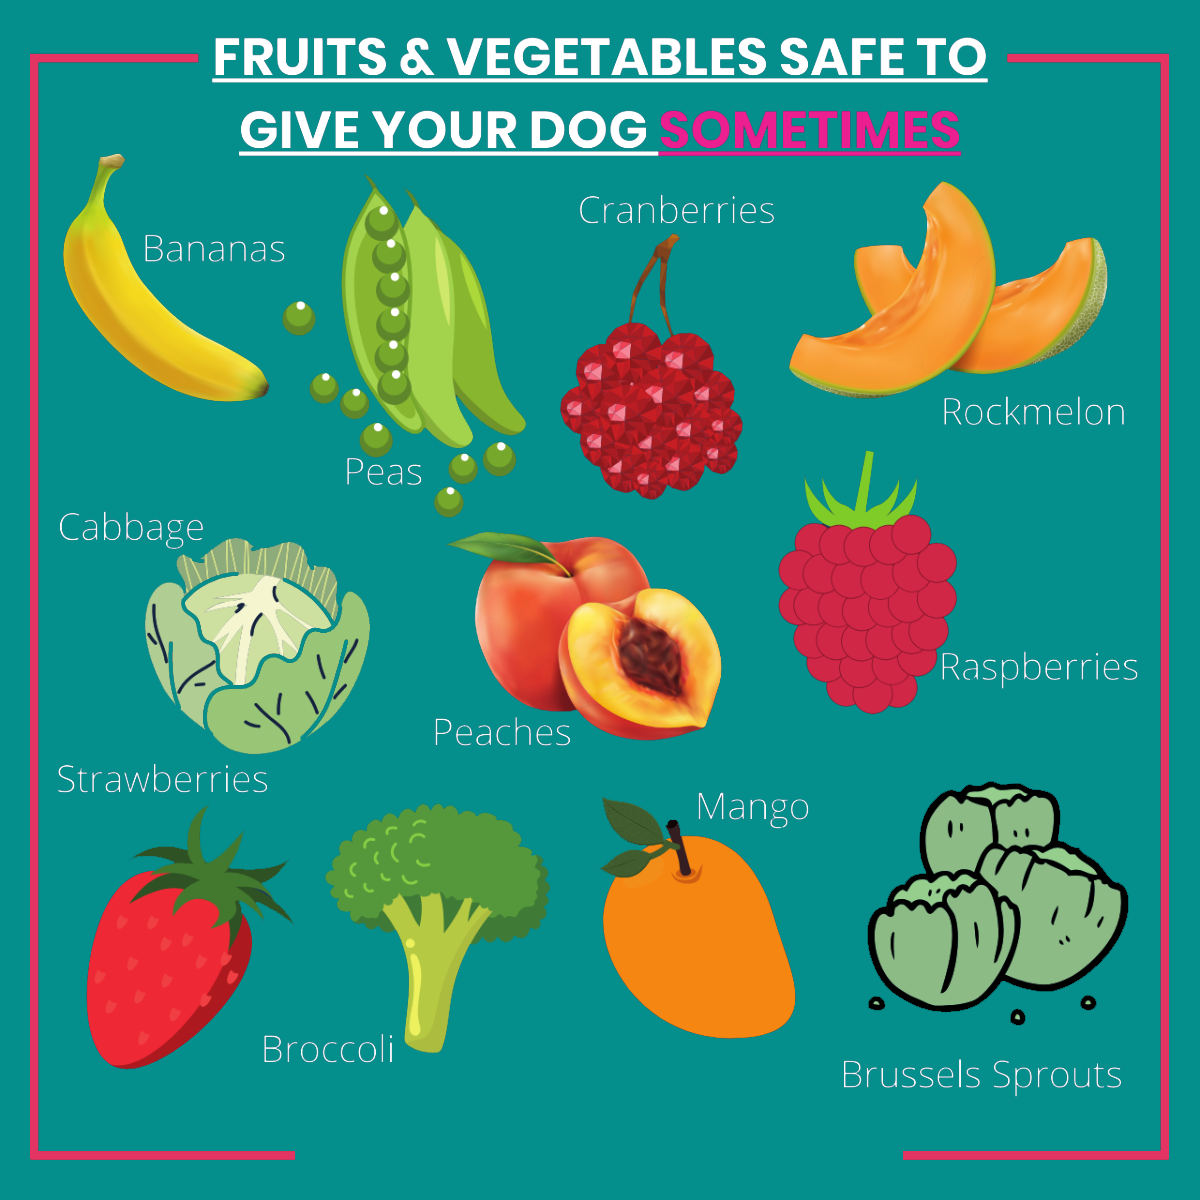 A graphic of fruits and vegetables that are ok for dogs to eat sometimes